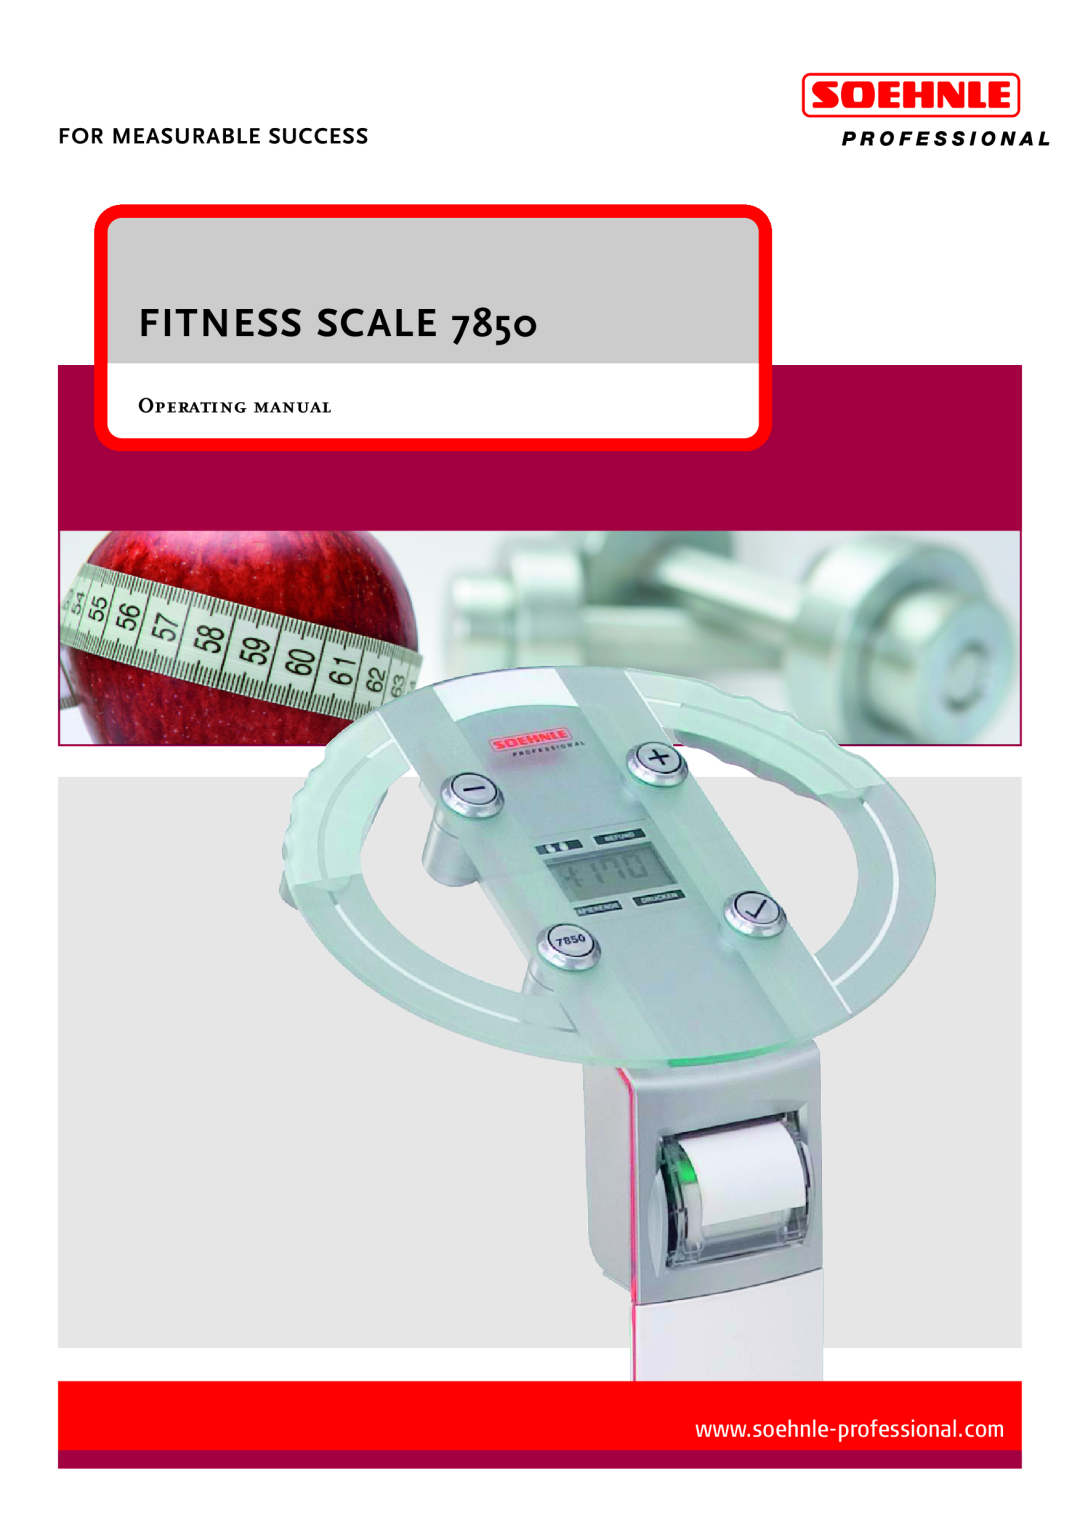 Soehnle 7850 manual Fitness Scale, For Measurable Success, Operating manual 